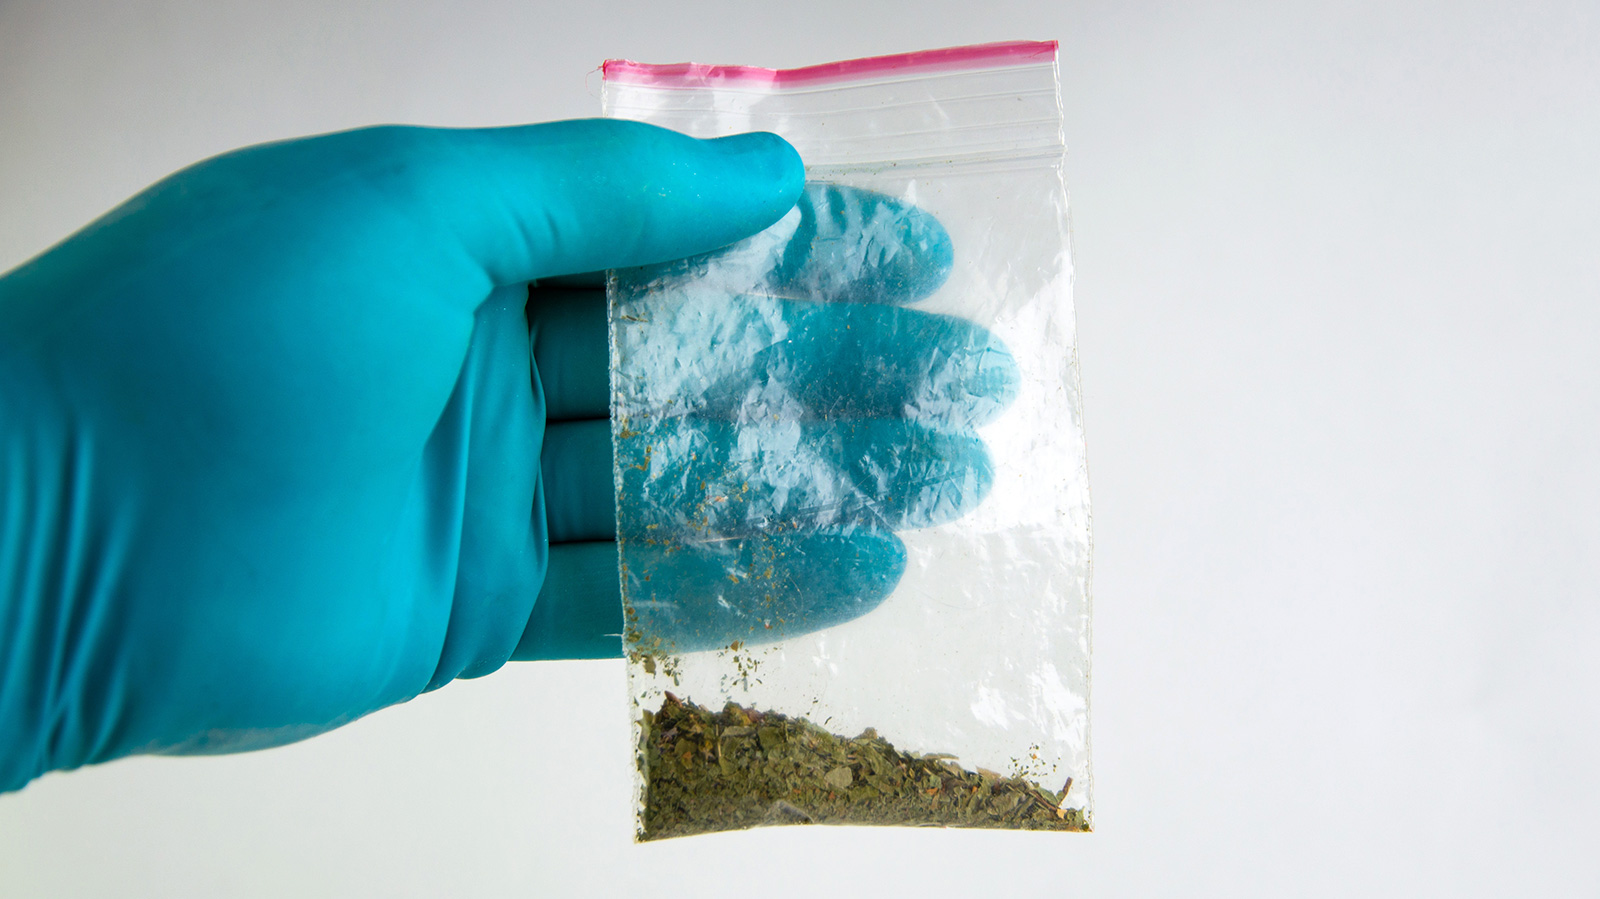 Four Things You Should Know About Synthetic Cannabinoids